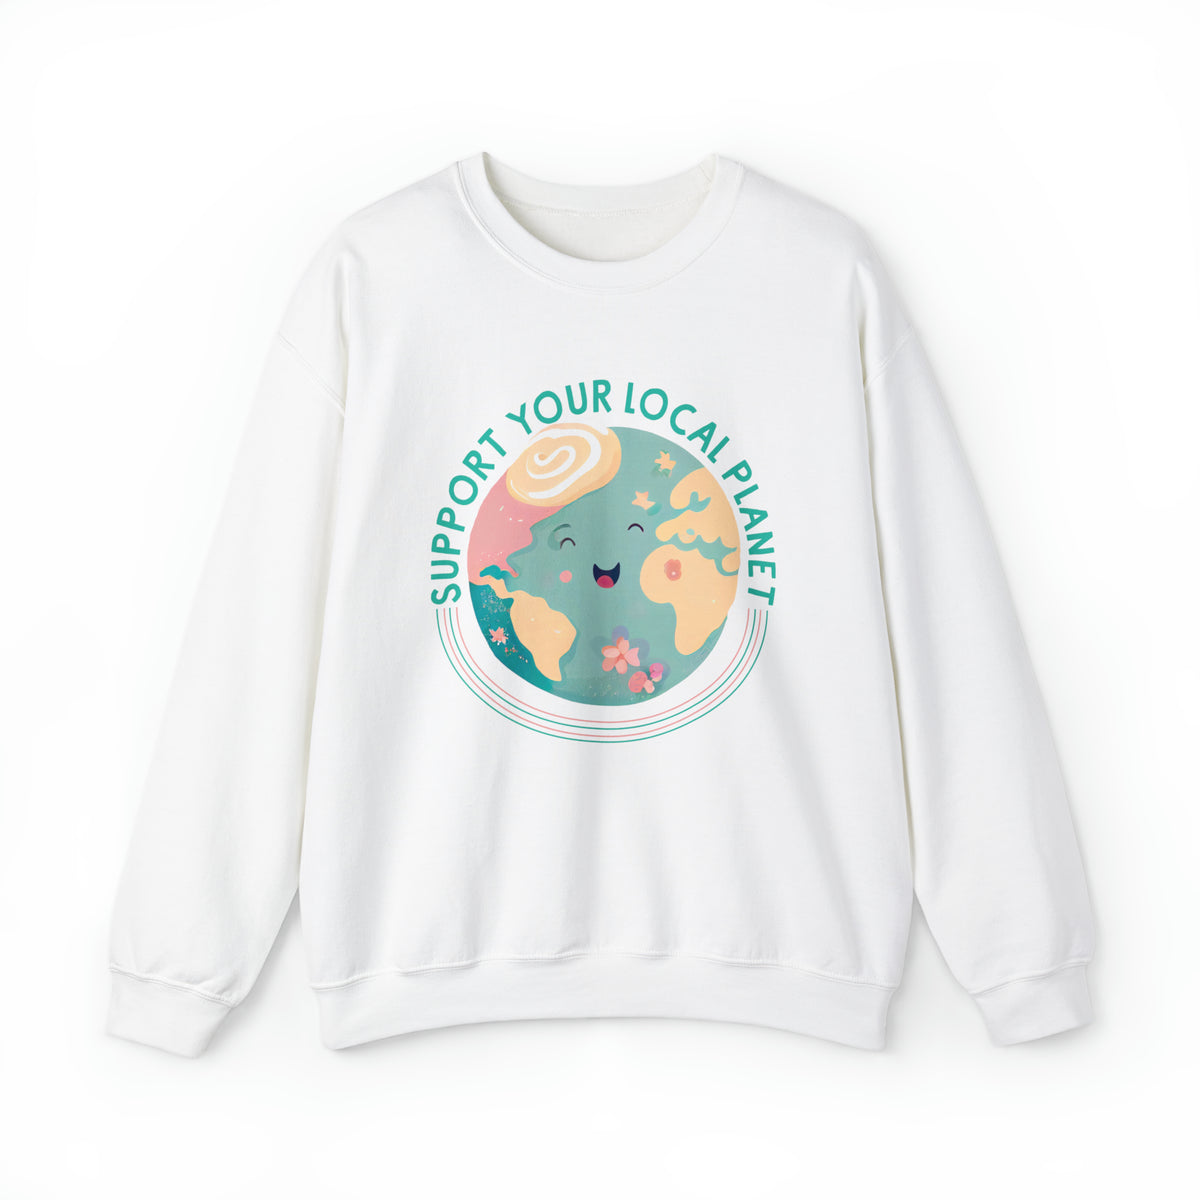 Support Your Local Planet Earth Day Shirt | Kawaii Style shirt | Nature Shirt | Gift For Her | Unisex Crewneck Sweatshirt